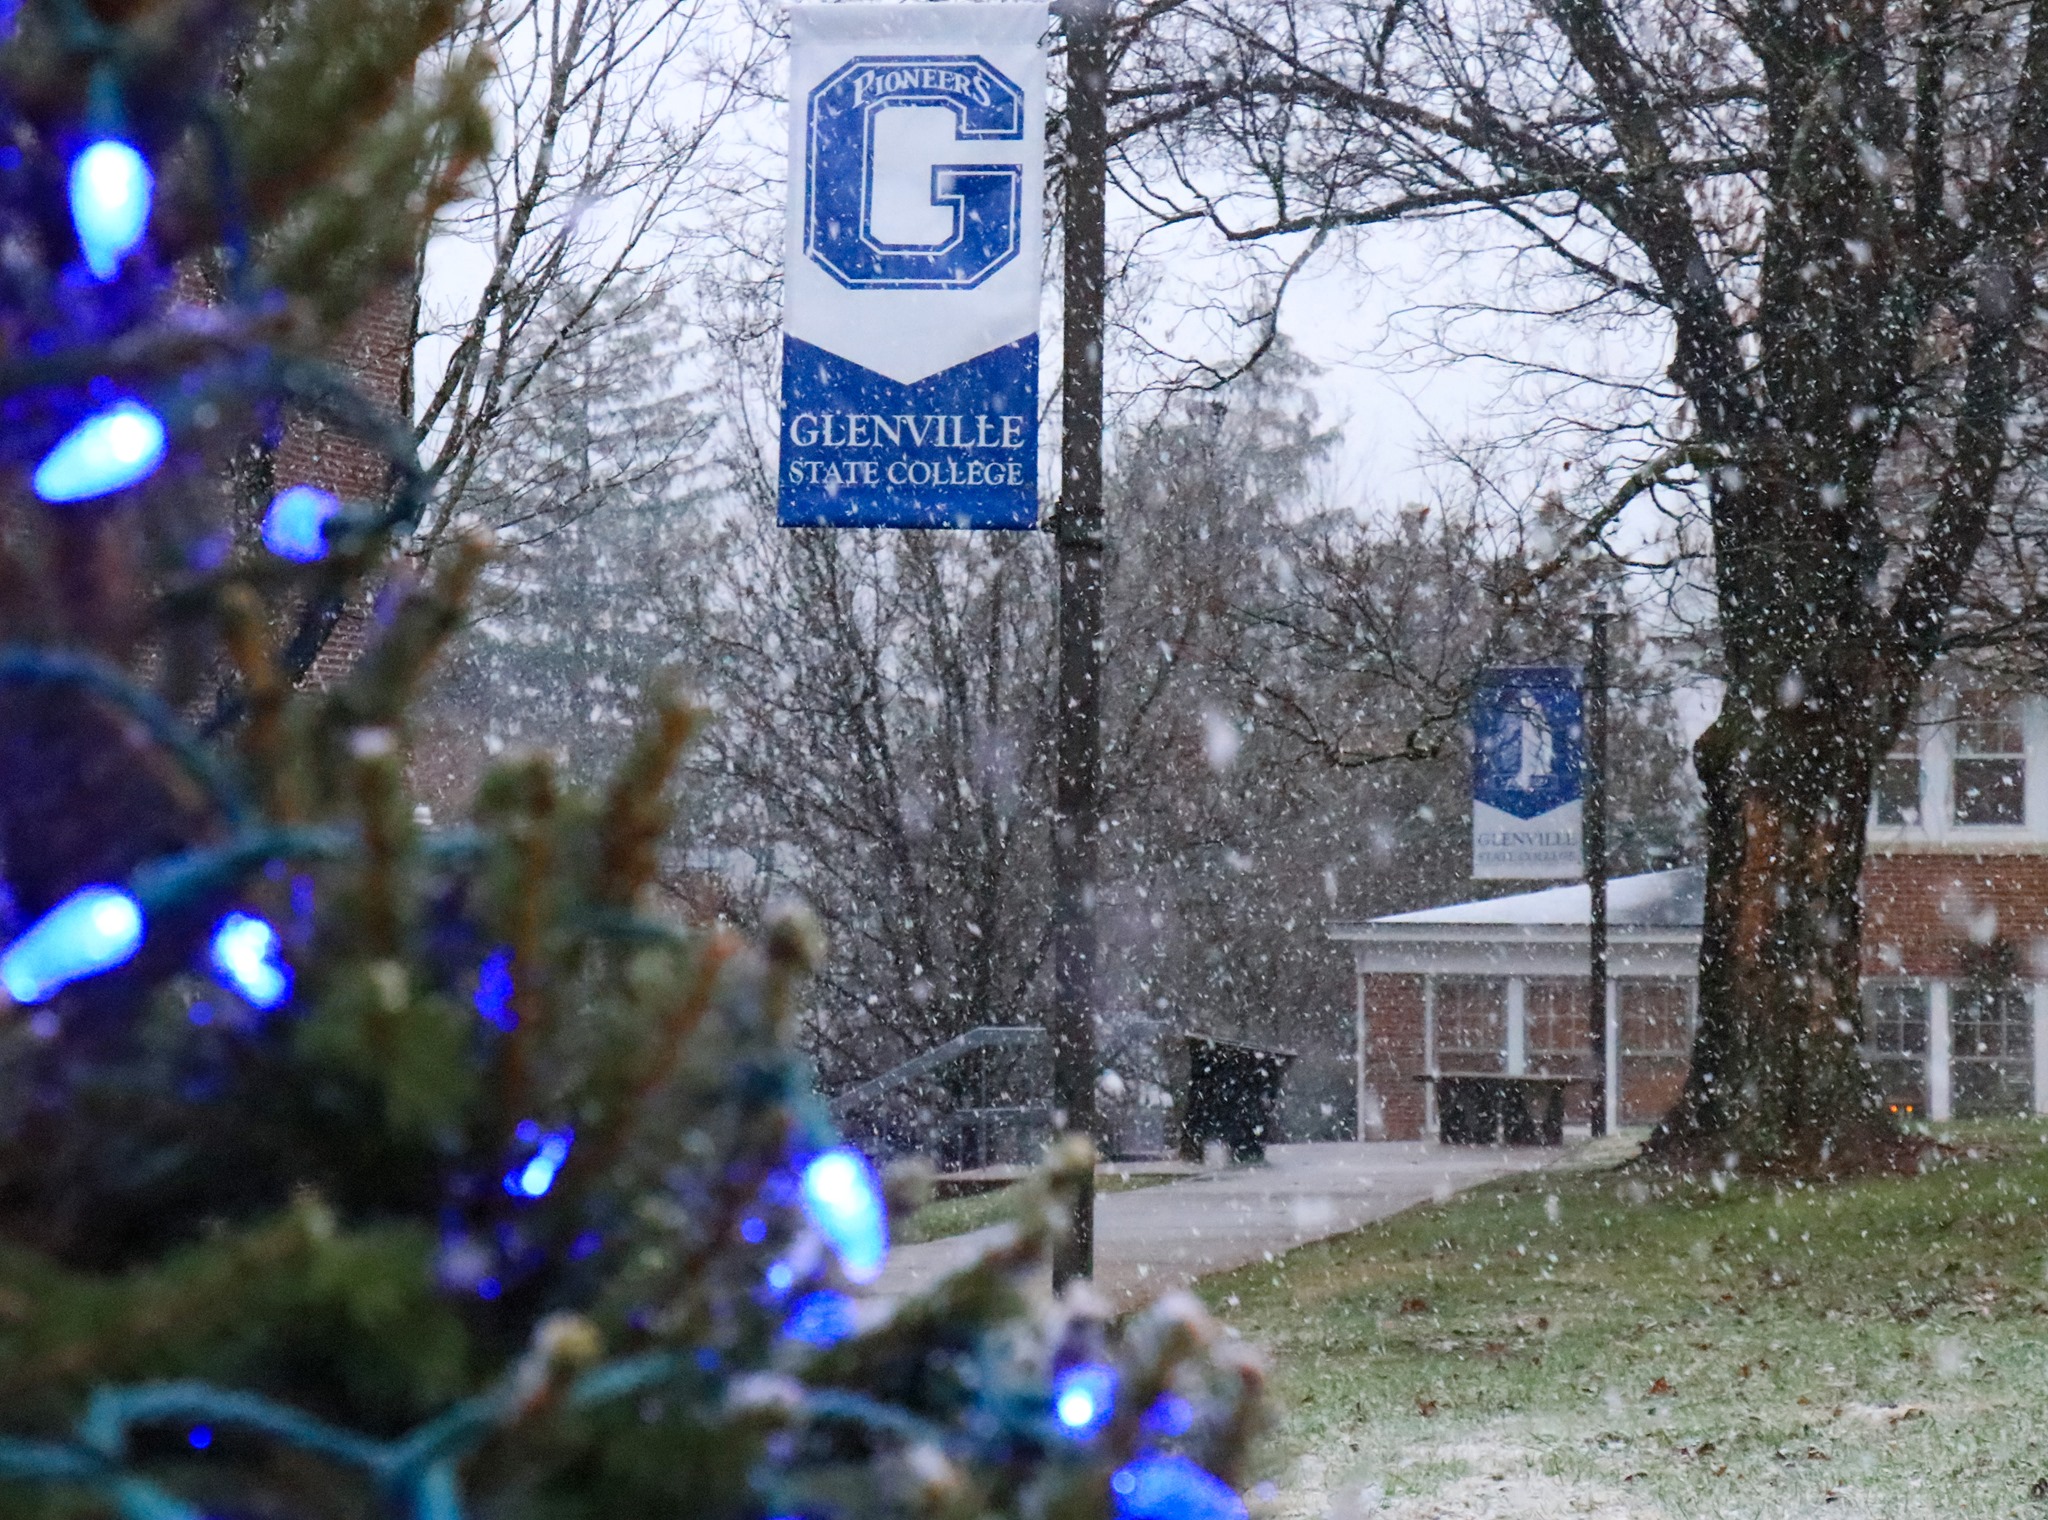 Snow falls on campus, contrasting against a dark gray sky. Trees with dark wood and lamp posts hung with bright blue banners line a walkway. In the foreground, there is the glow of blue lights twinkling on a pine.